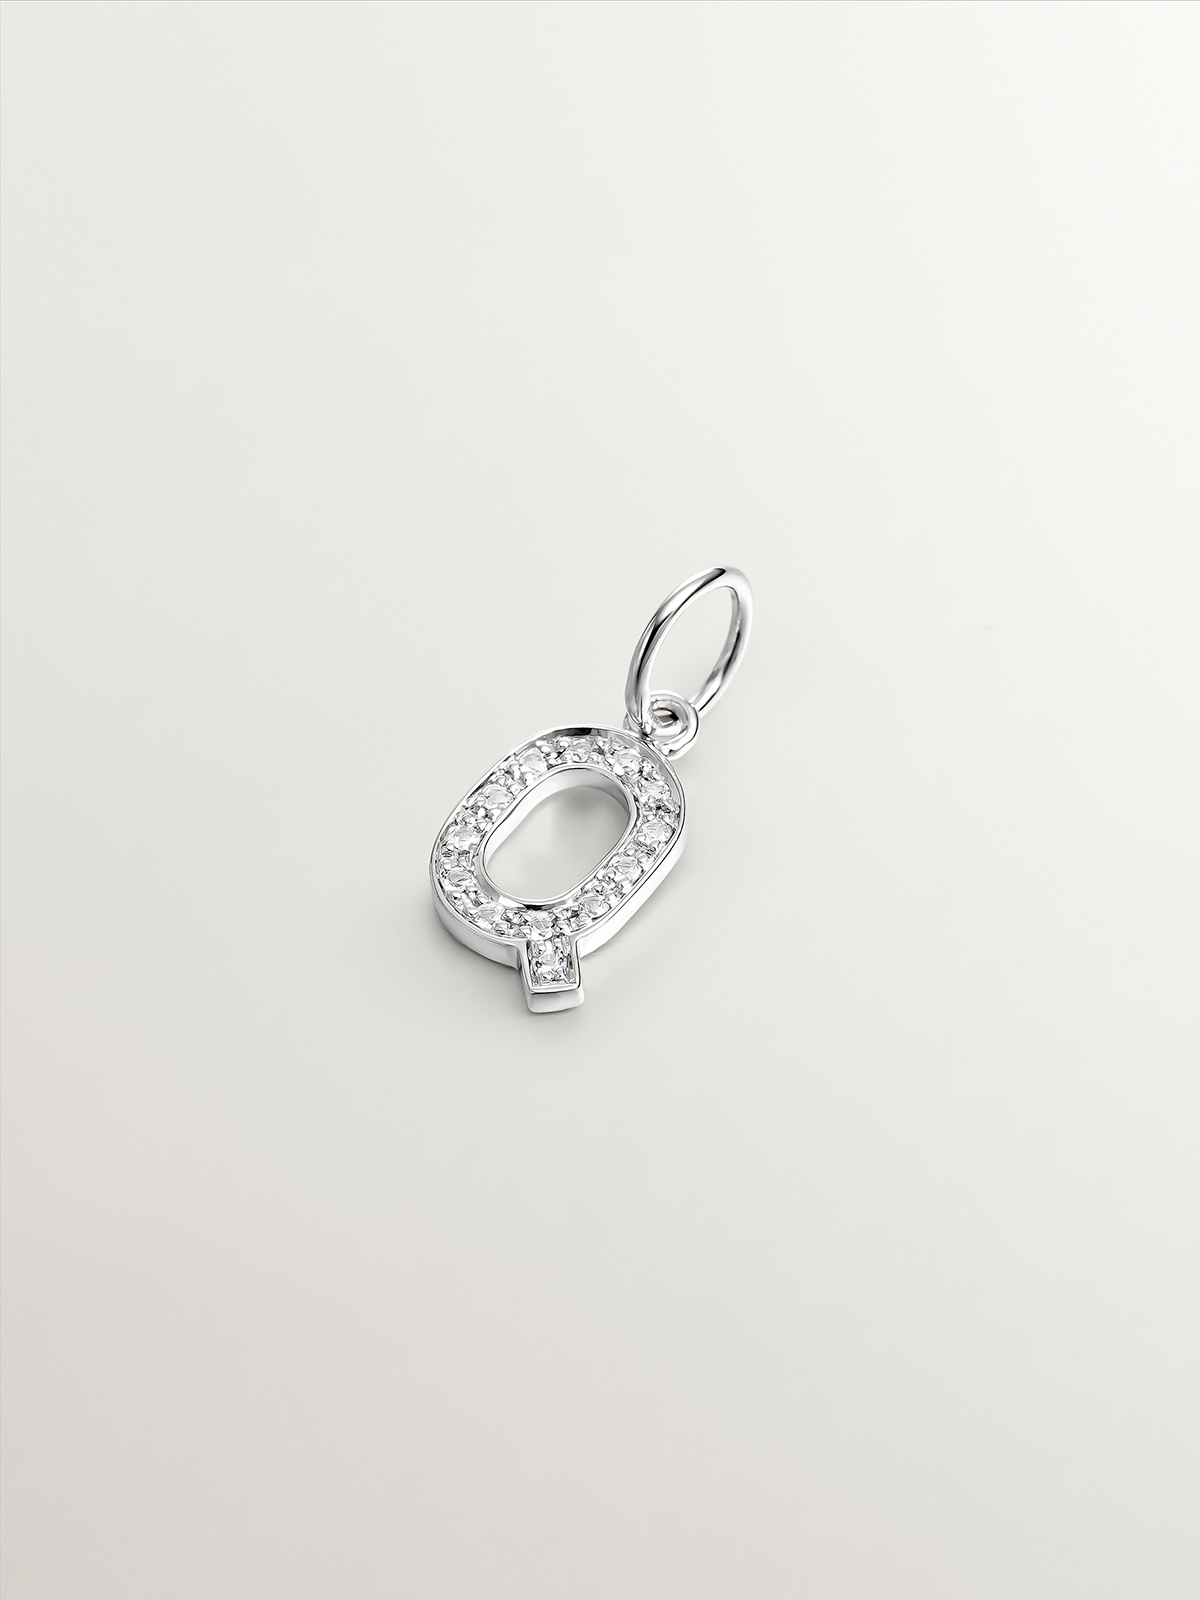 925 Silver Charm with White Topaz Initial Q